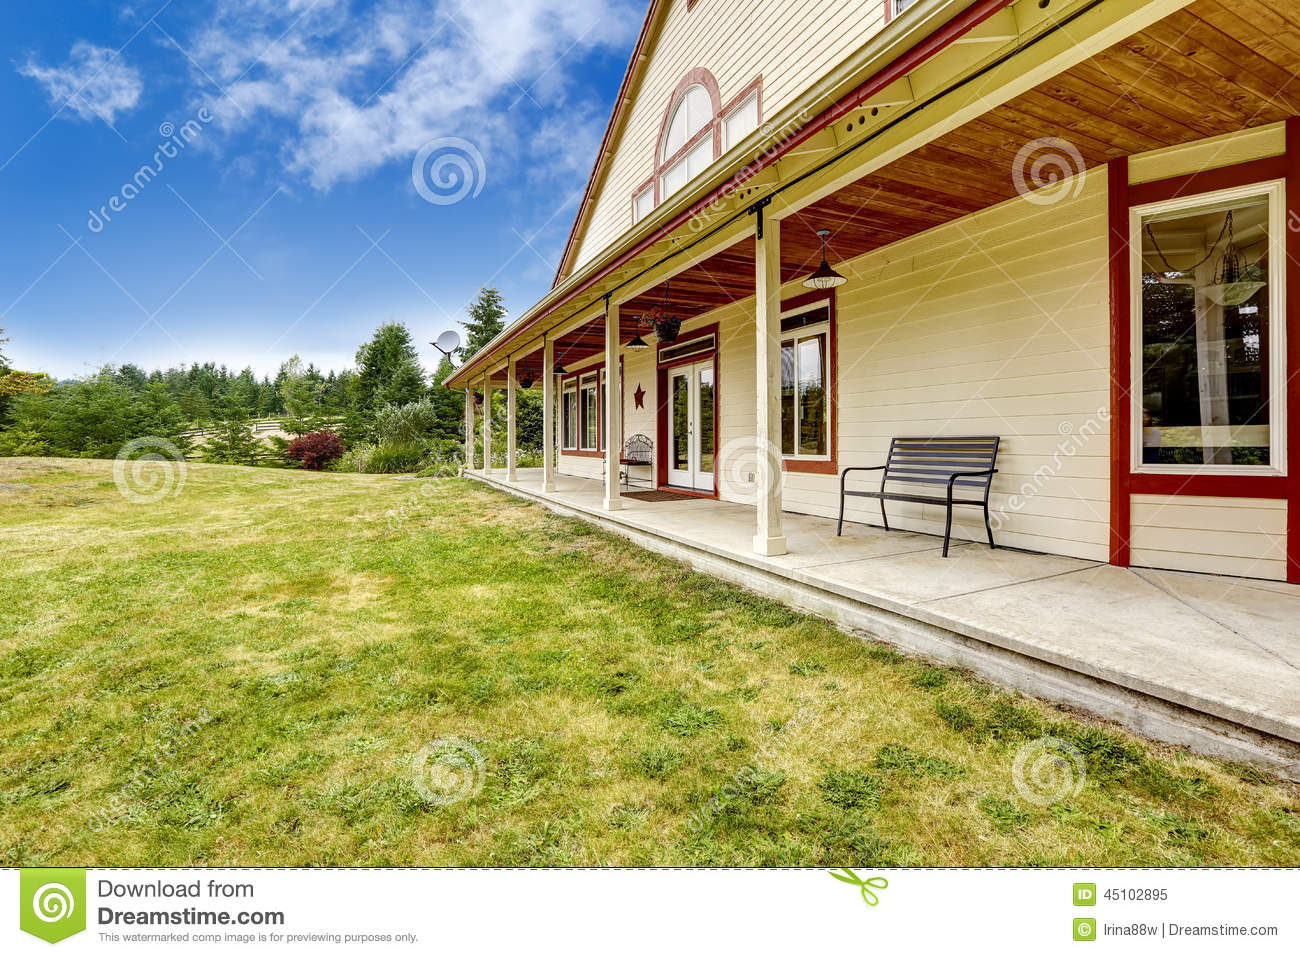 Photo  American Farm House Exterior  Large Intrance Porch With Bench